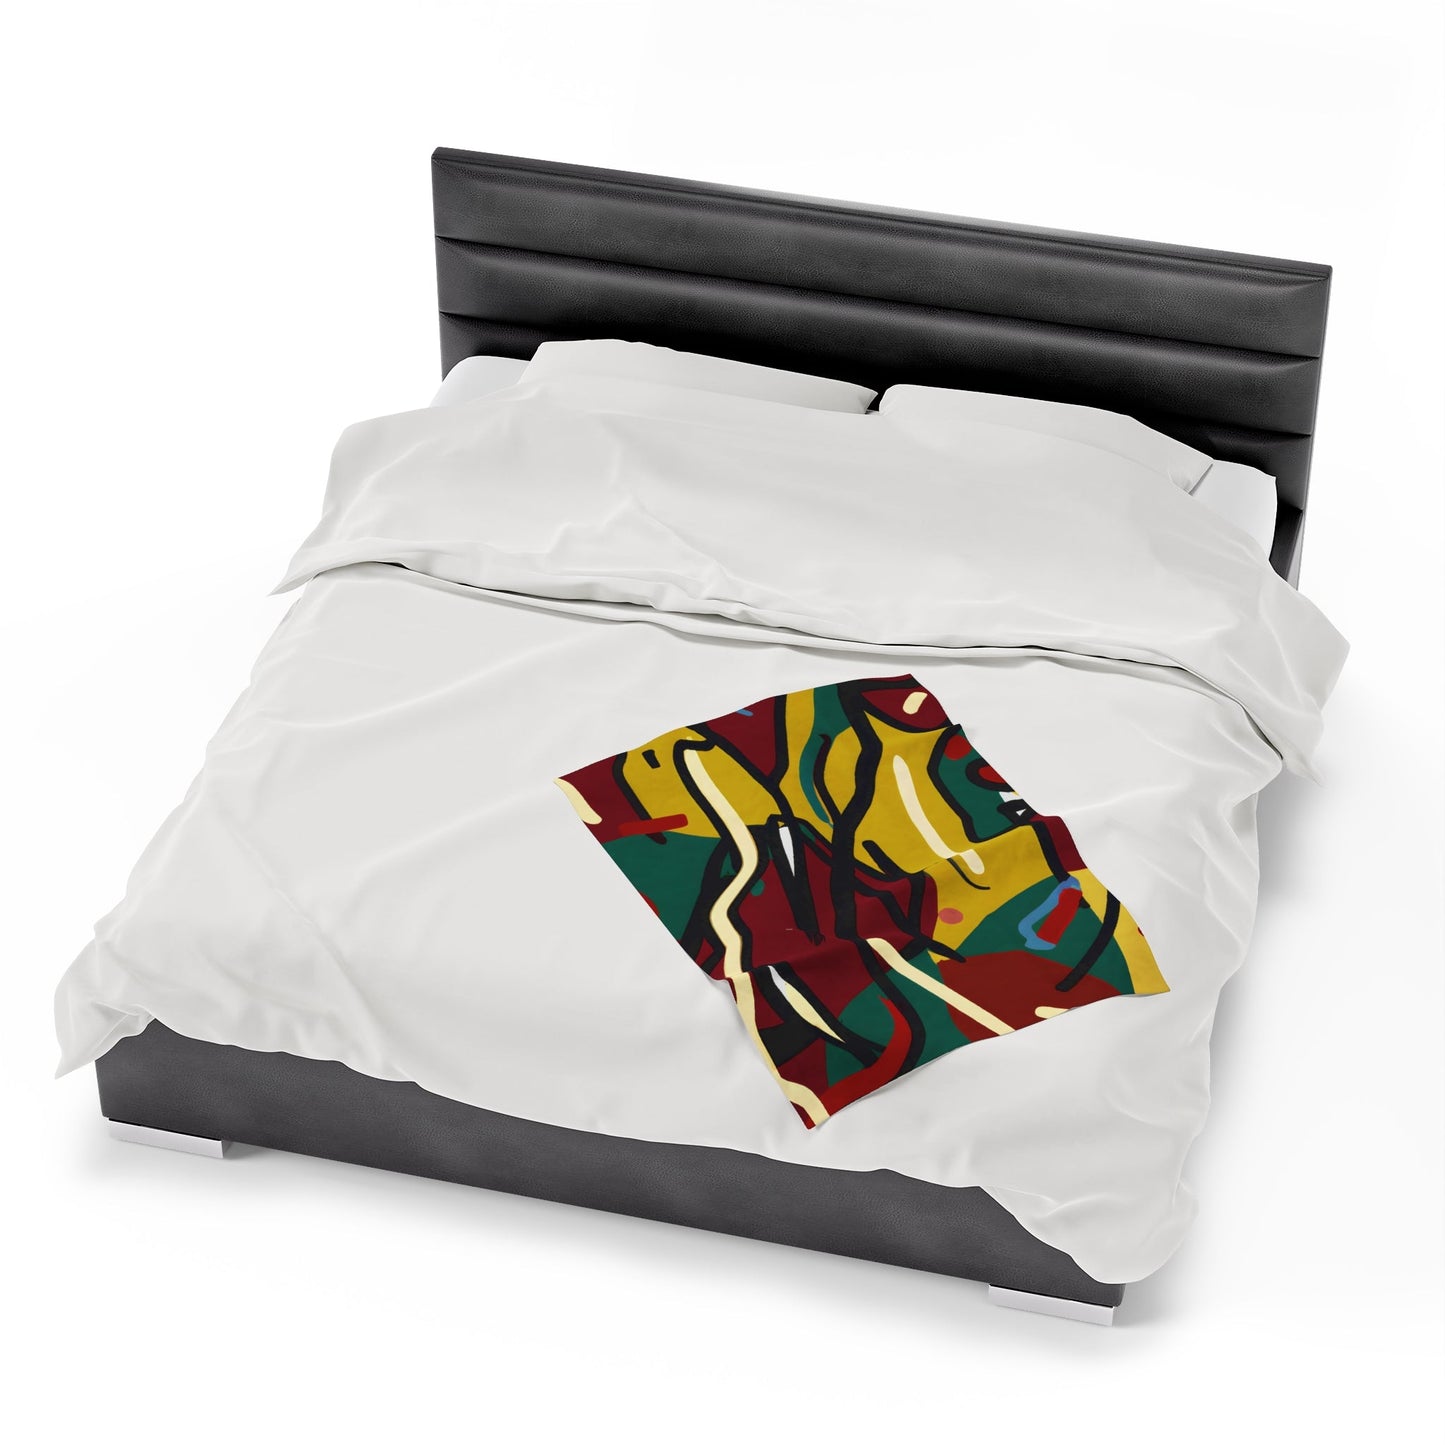 Absoluxe - Plush Blanket-All Over Prints-Mr.Zao - Krazy Art Gallery